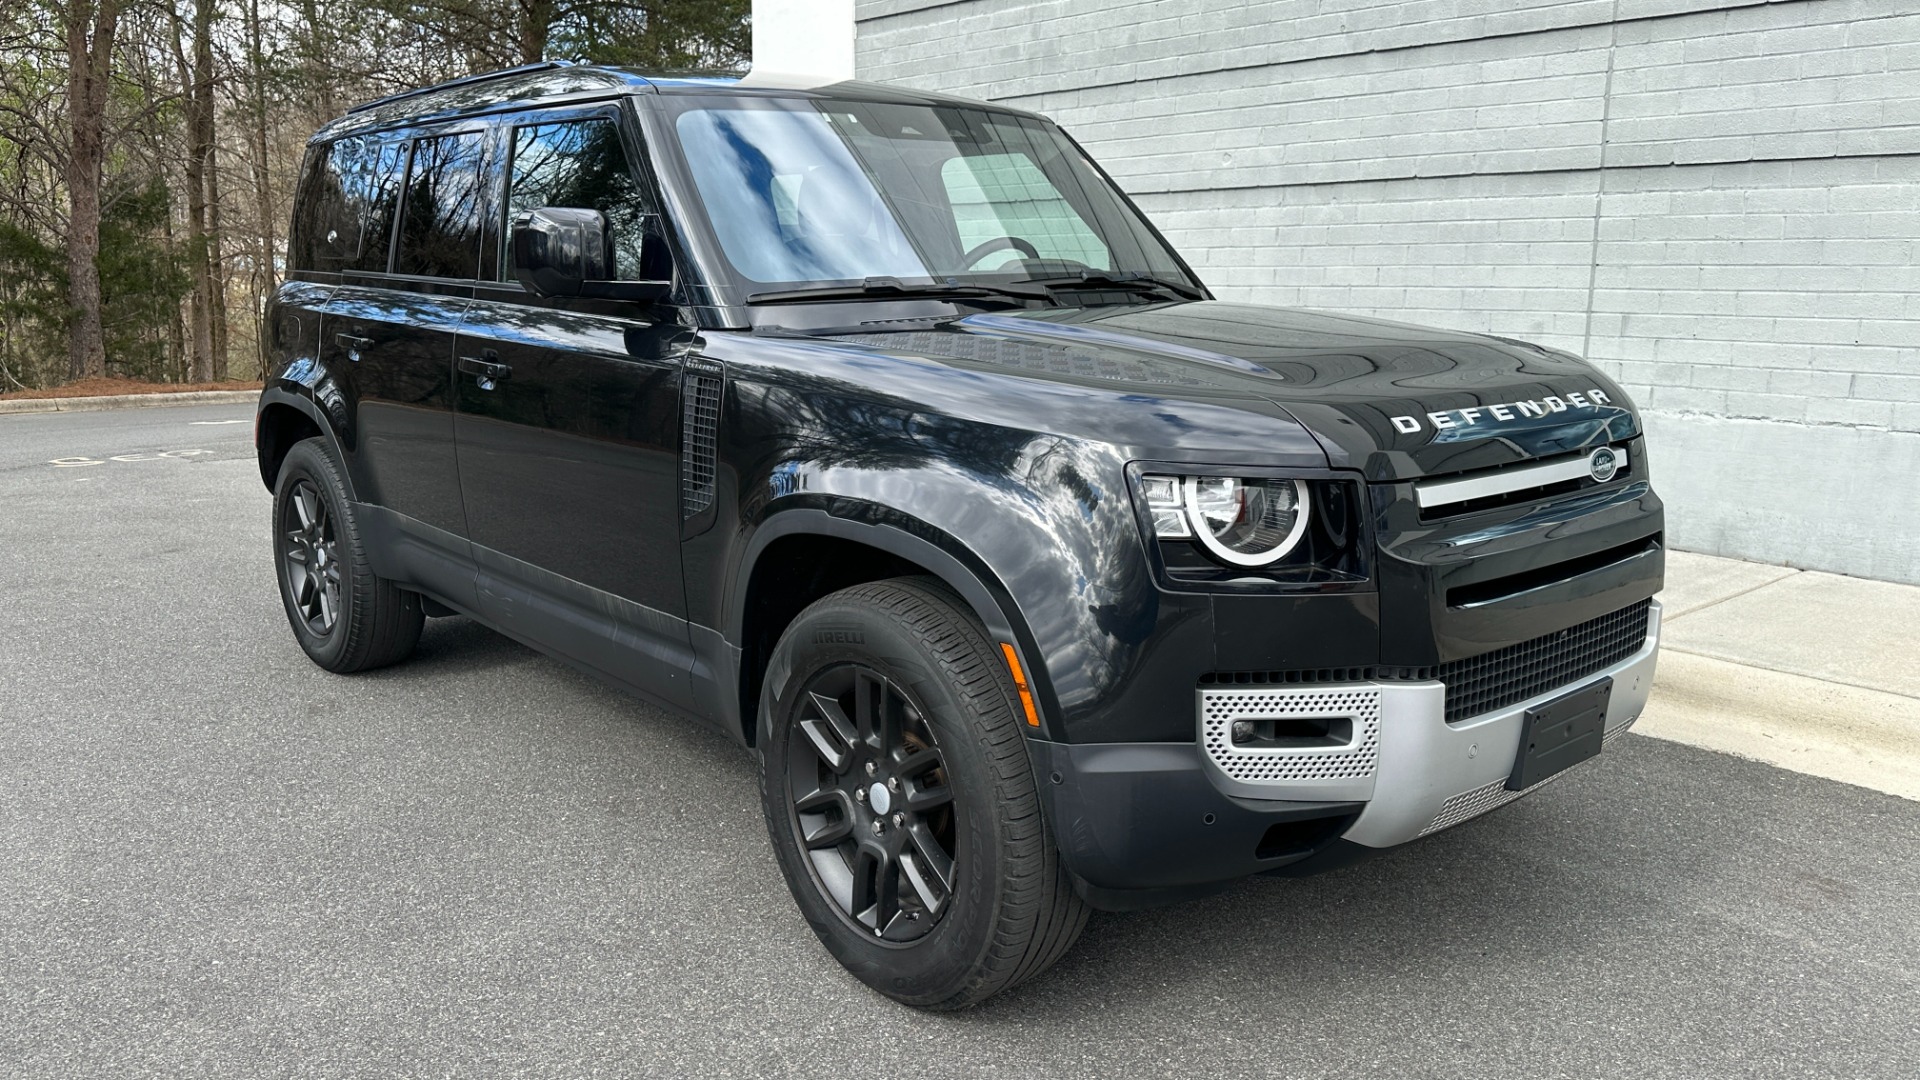 Used 2020 Land Rover Defender S / PANORAMIC ROOF / FOG LIGHTS / CLEARSIGHT MIRROR / 12 WAY HEATED SEATS for sale Sold at Formula Imports in Charlotte NC 28227 5